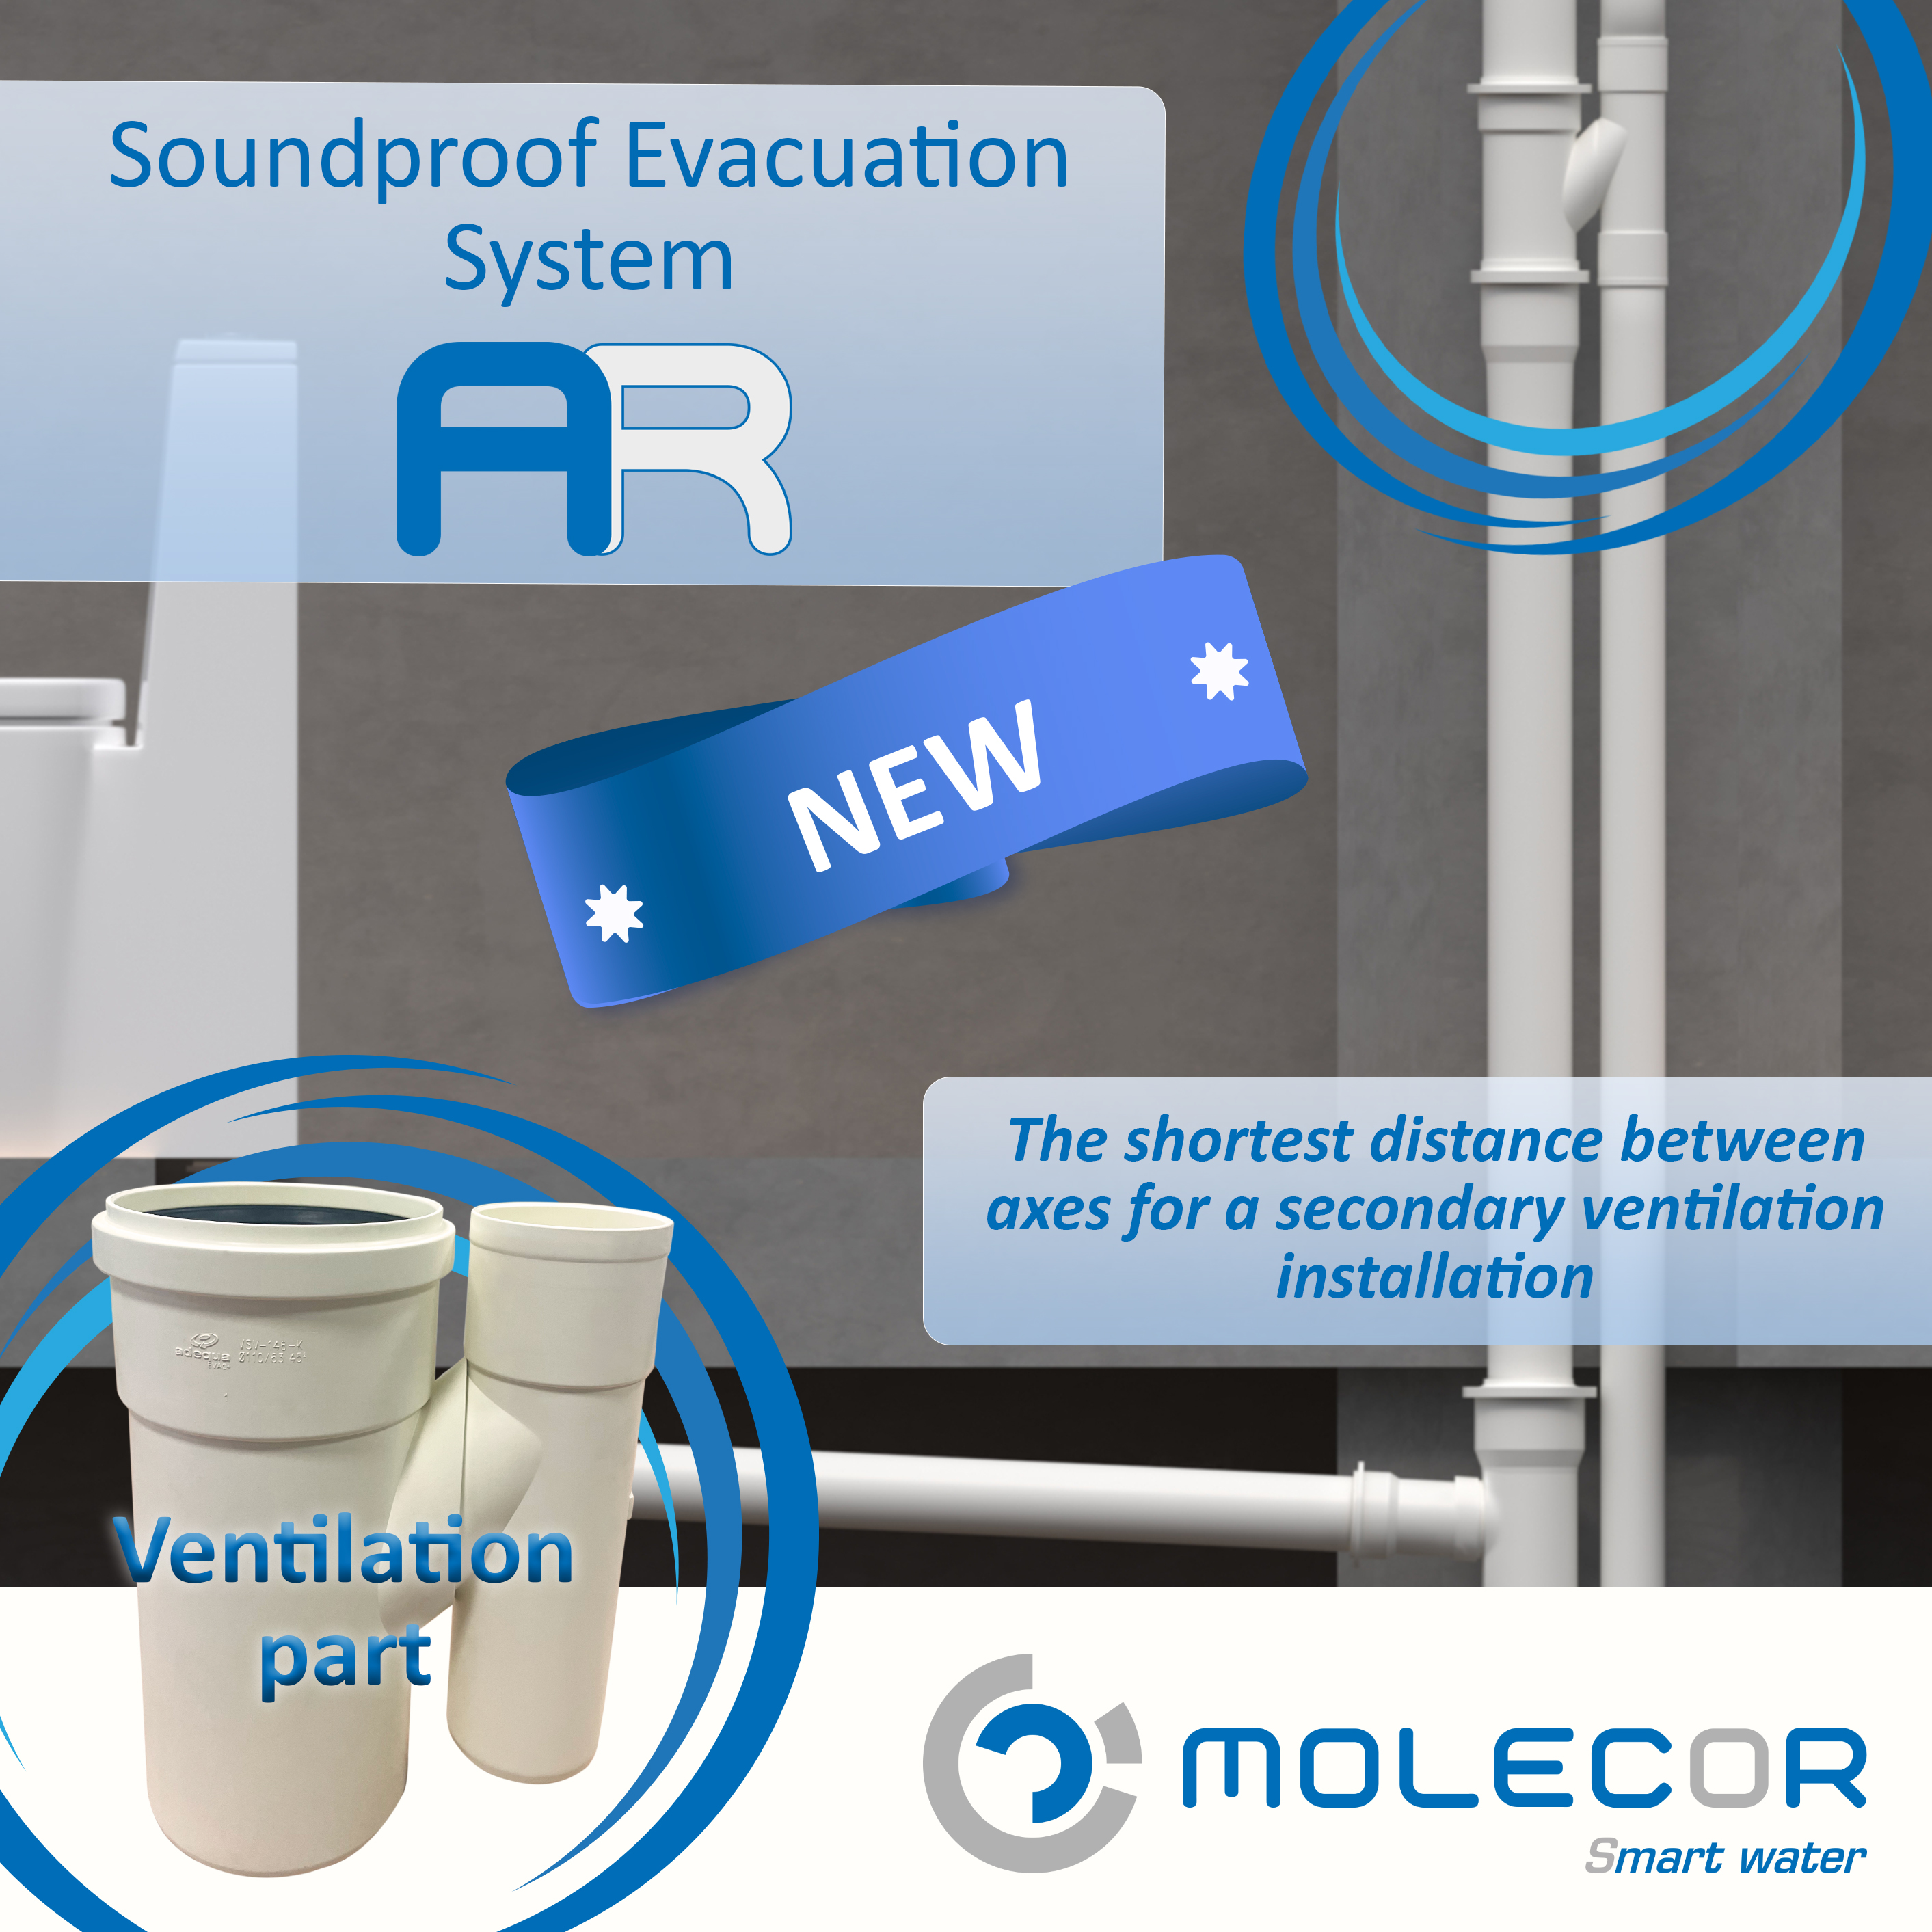 Molecor has launched a new ventilation part for the AR® Soundproof System